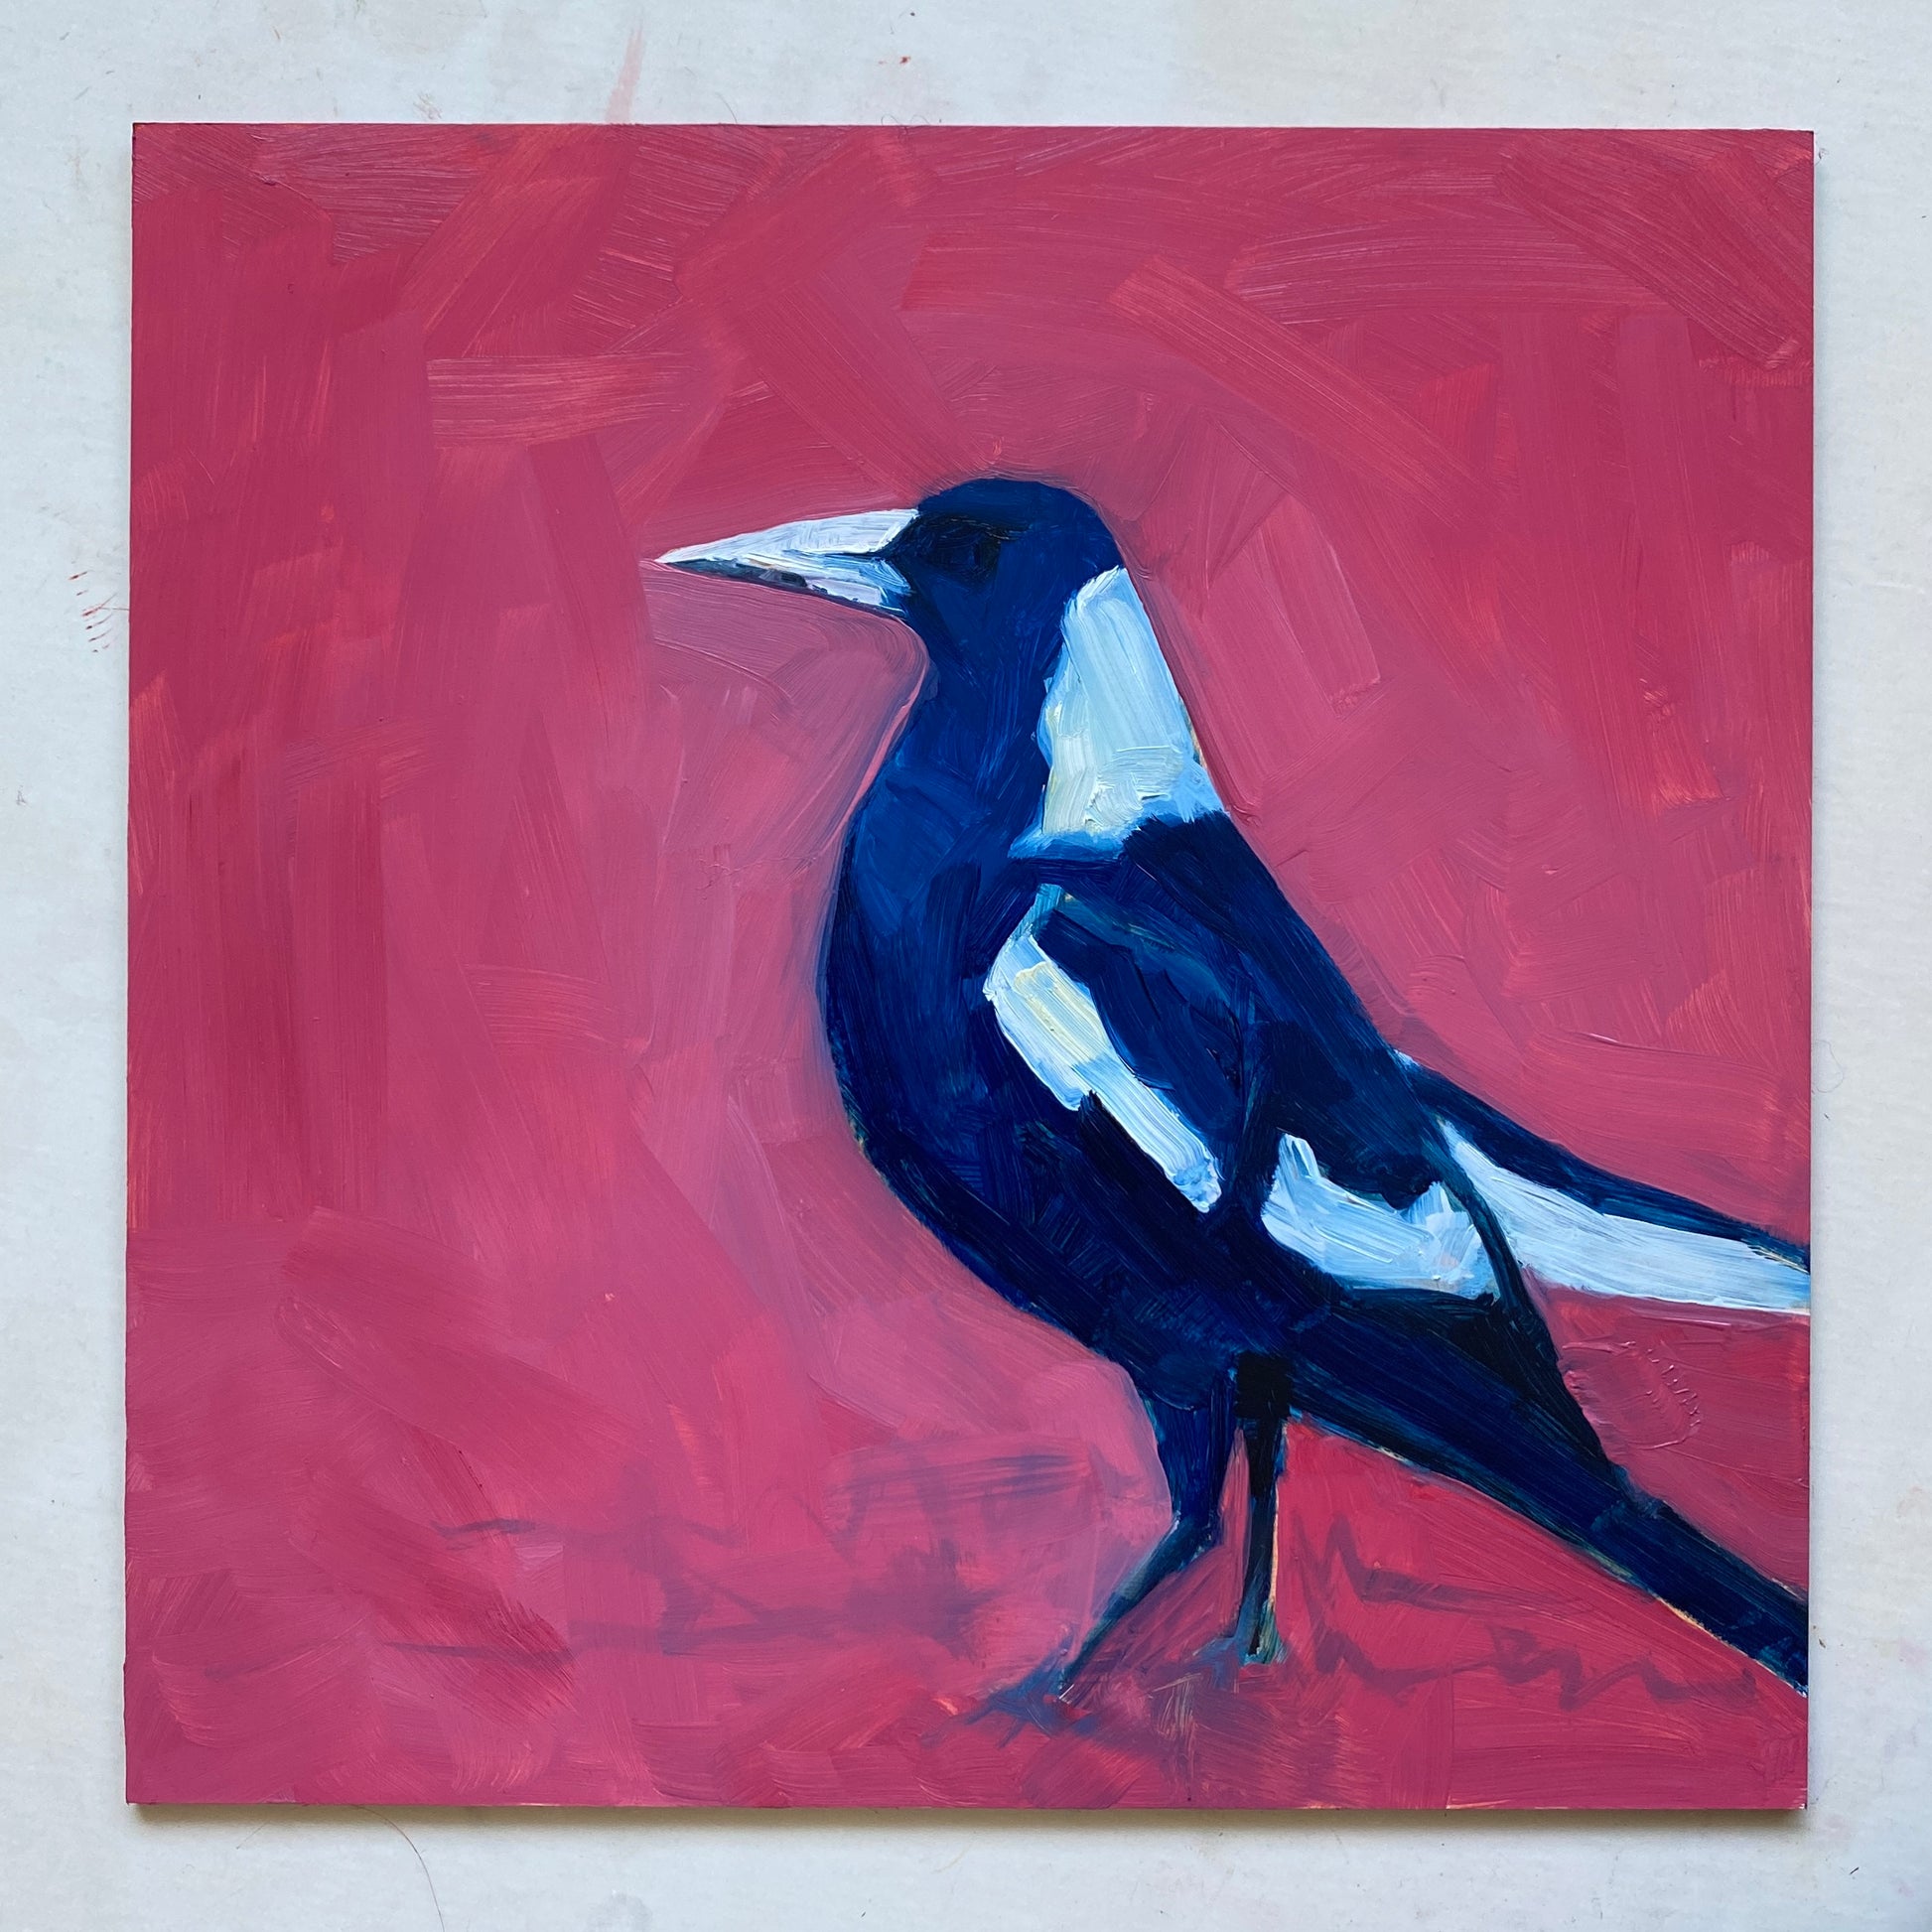 oil painting on panel of a magpie in navy blue and white on a bright pink background